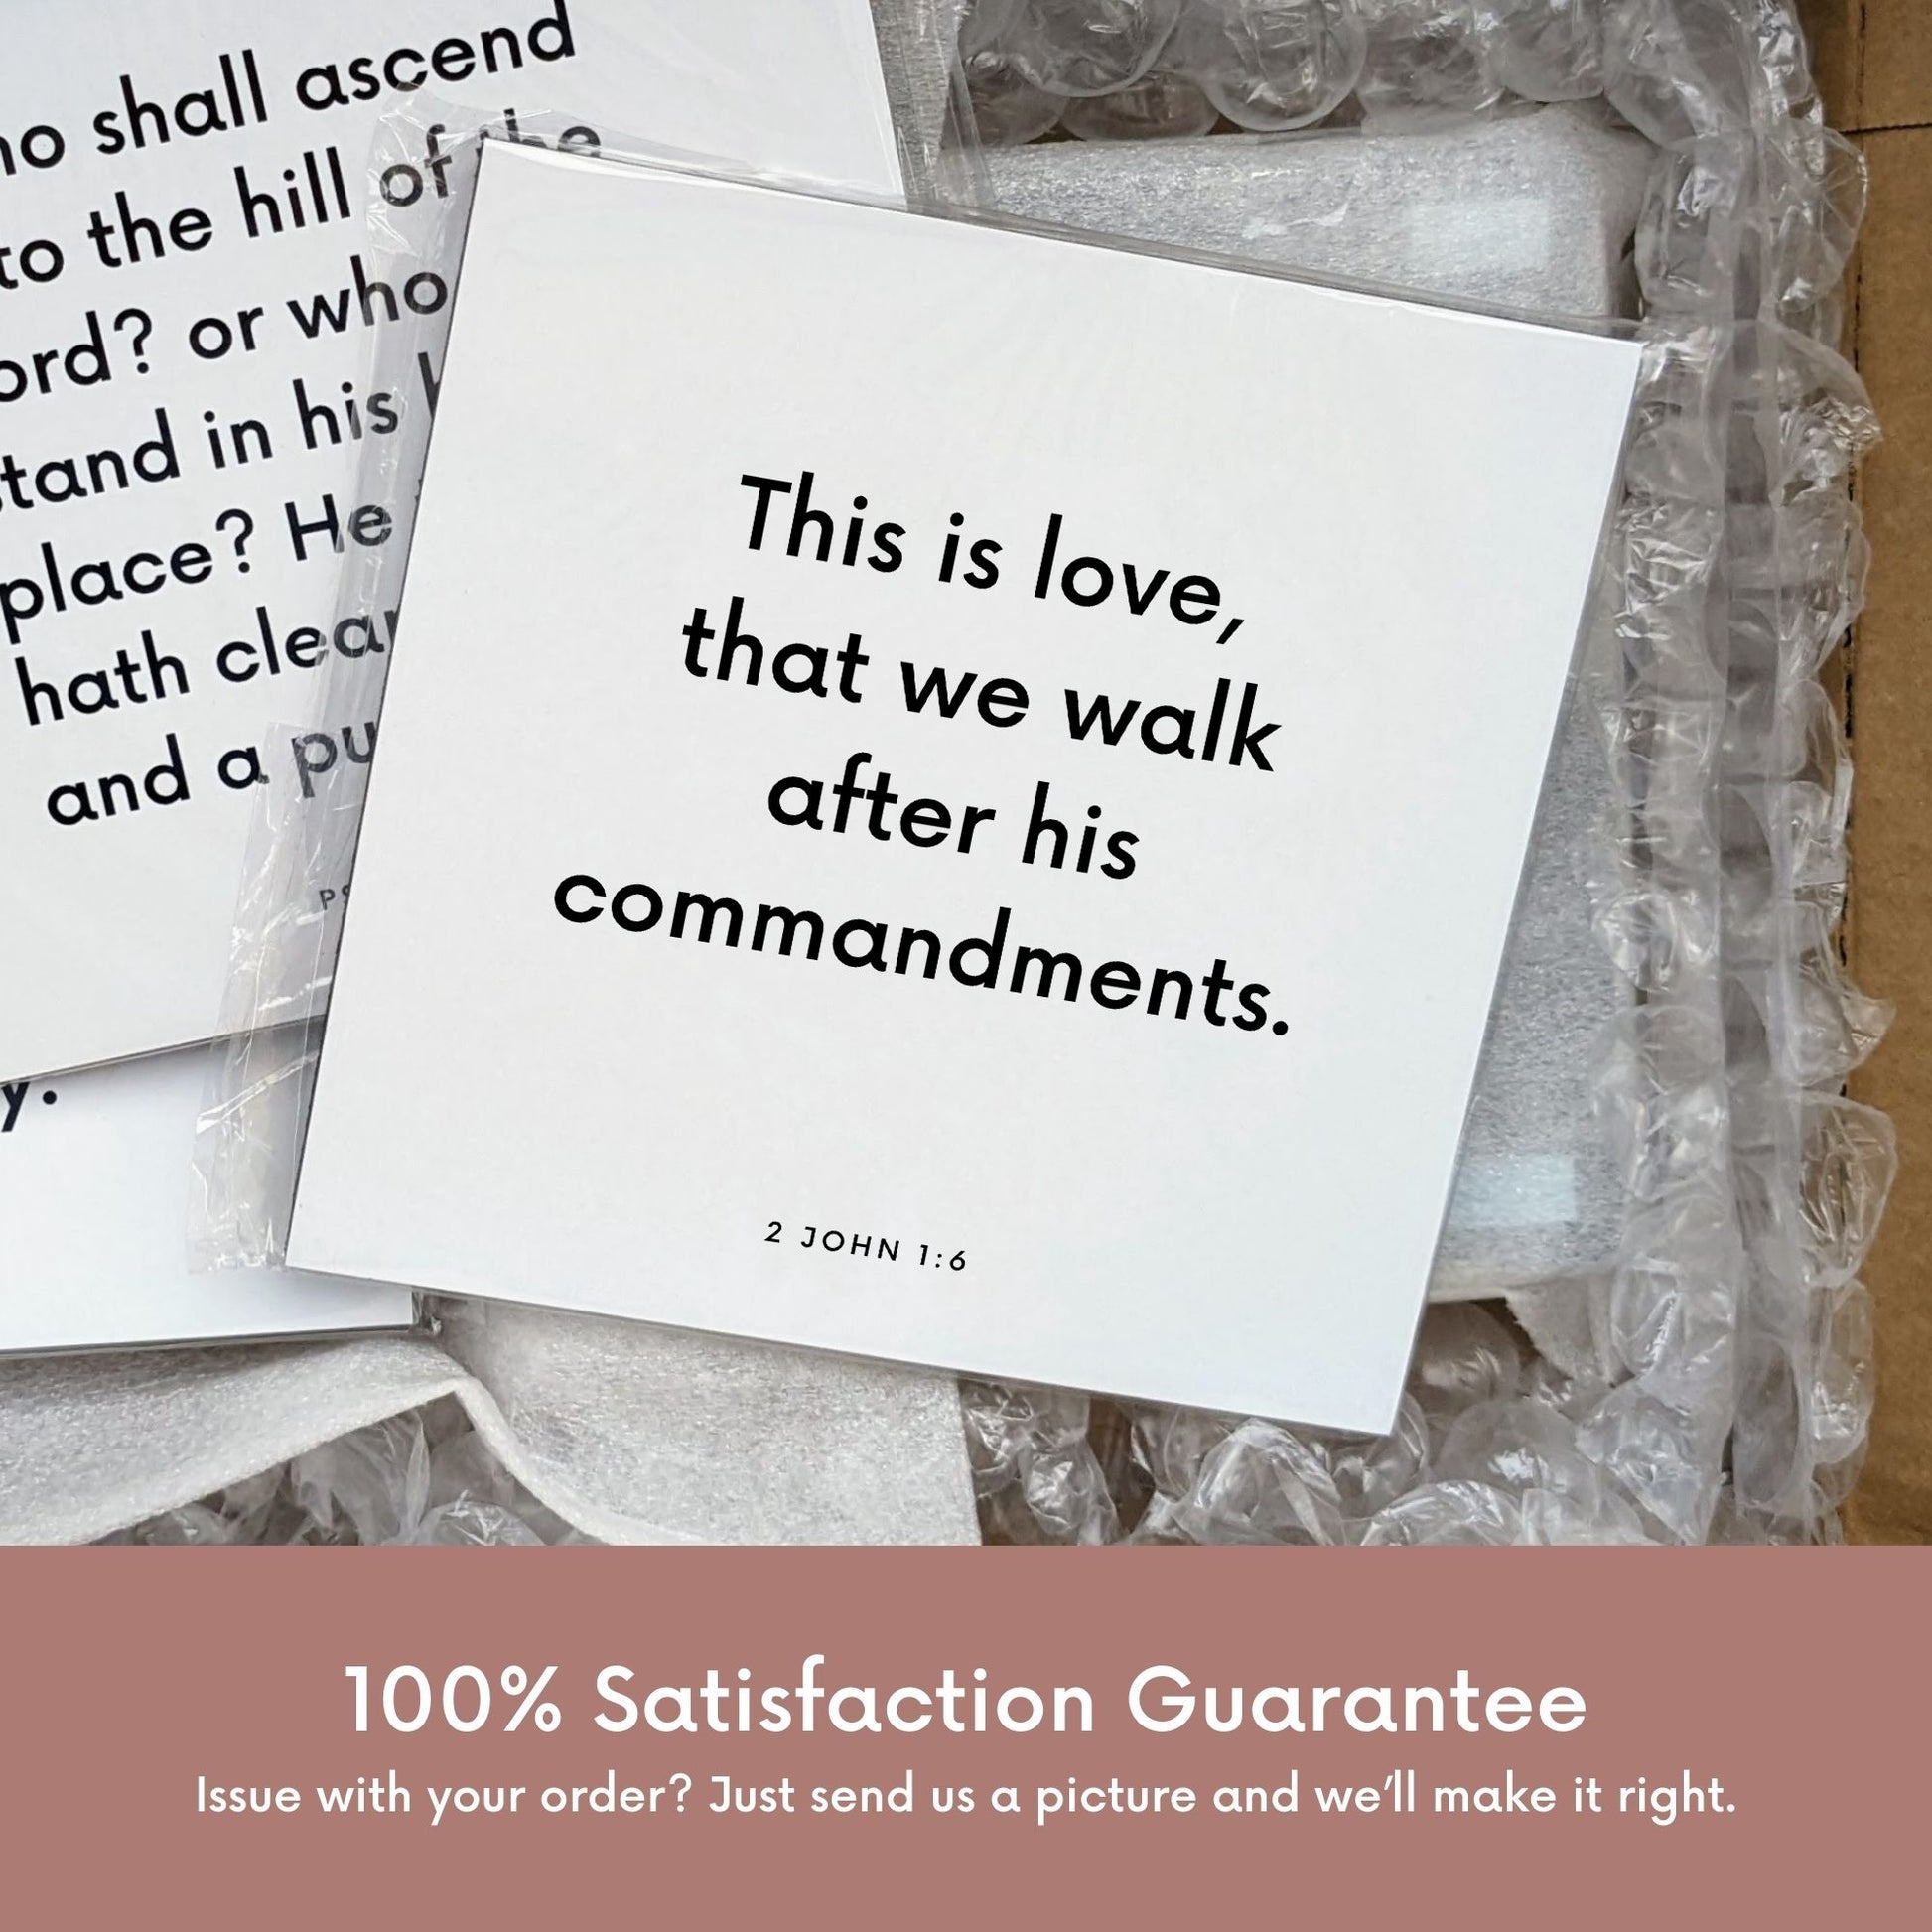 Shipping materials for scripture tile of 2 John 1:6 - "This is love, that we walk after his commandments"